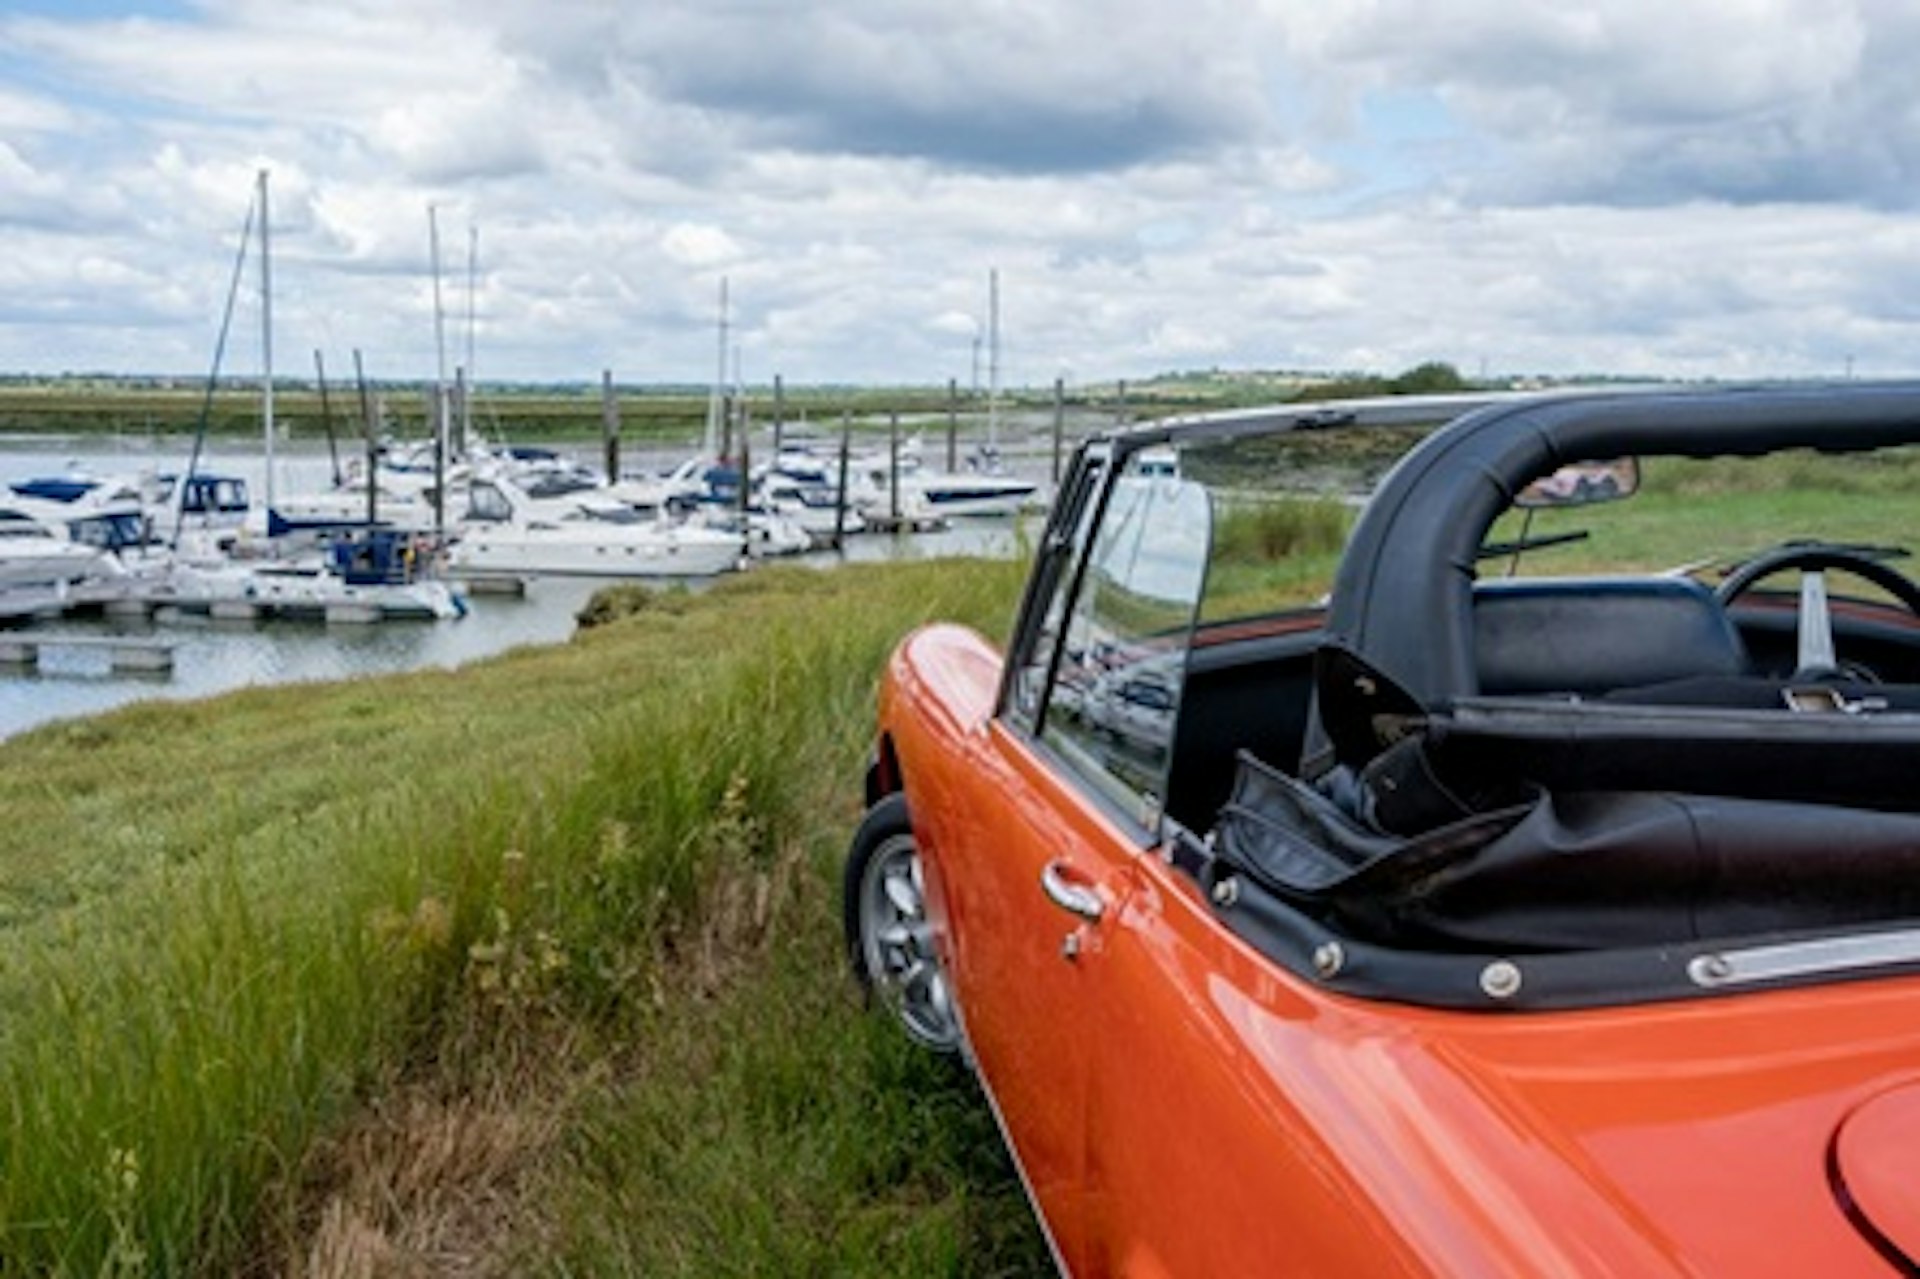 MG Midget Classic Car On Road Driving Experience 4